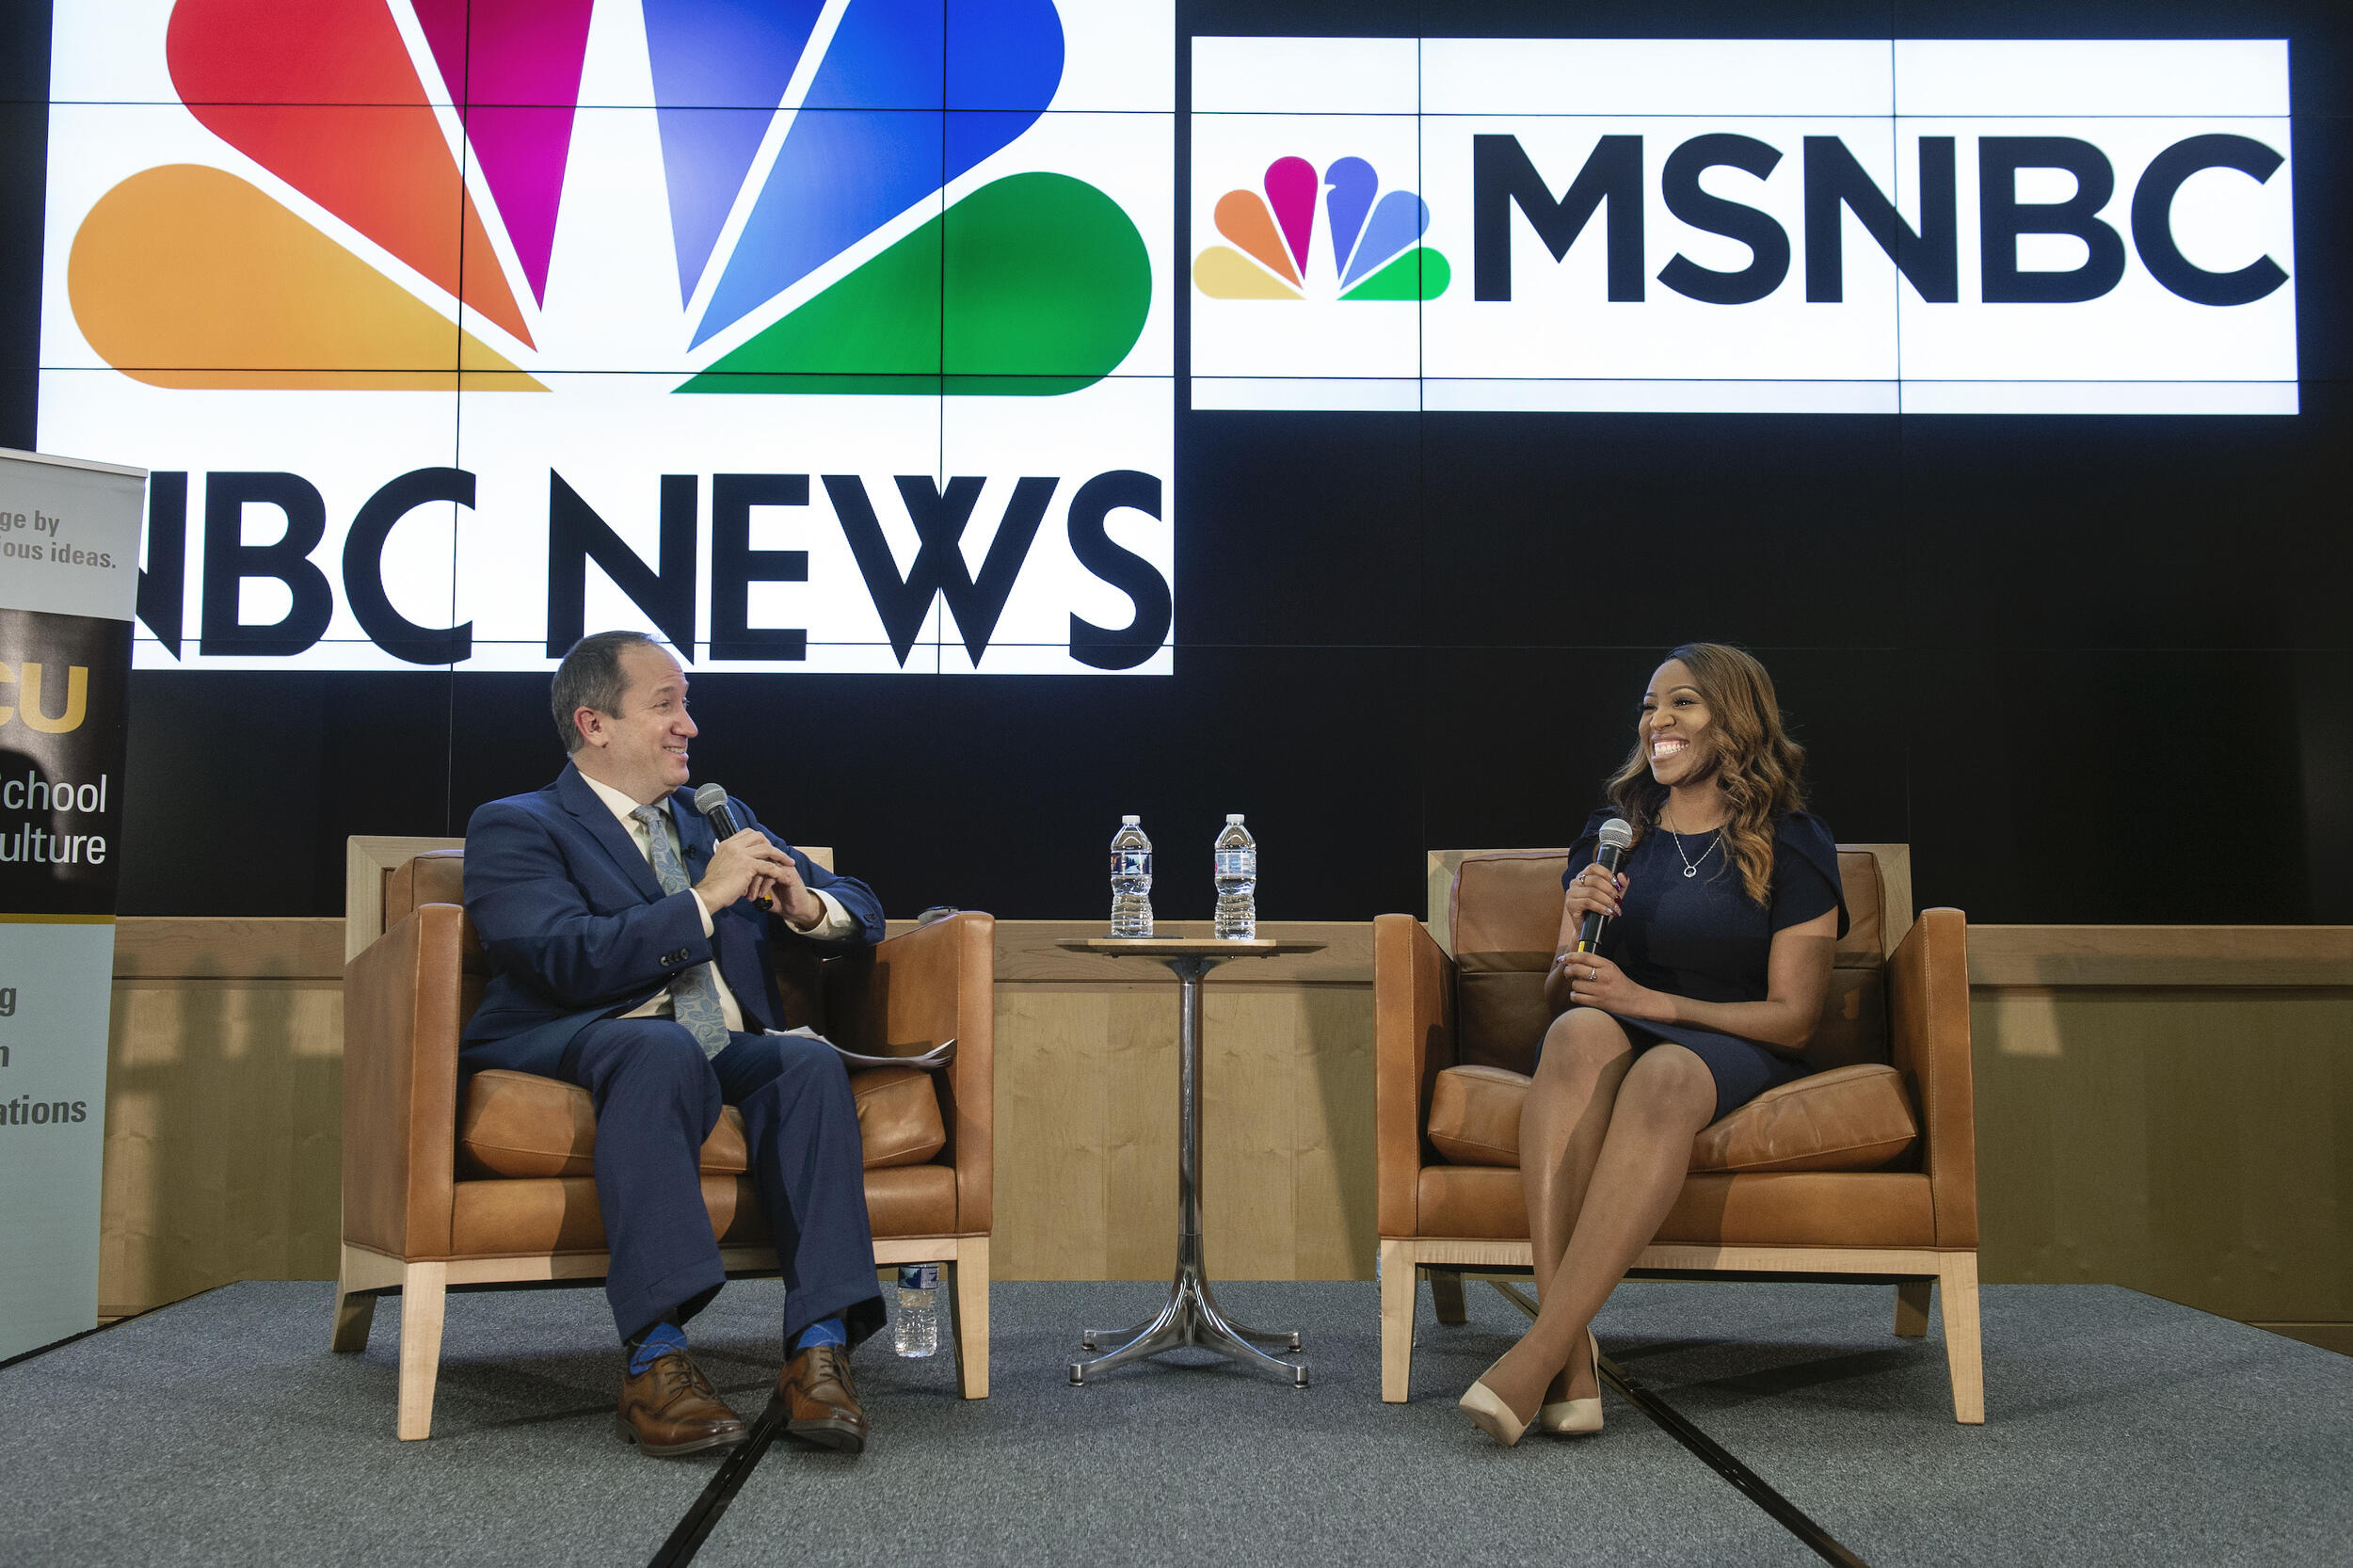 Tim Bajkiewicz, Ph.D., Chandelis Duster seated on a stage. Logos for NBC News and MSNBC are displayed on the screen behind.